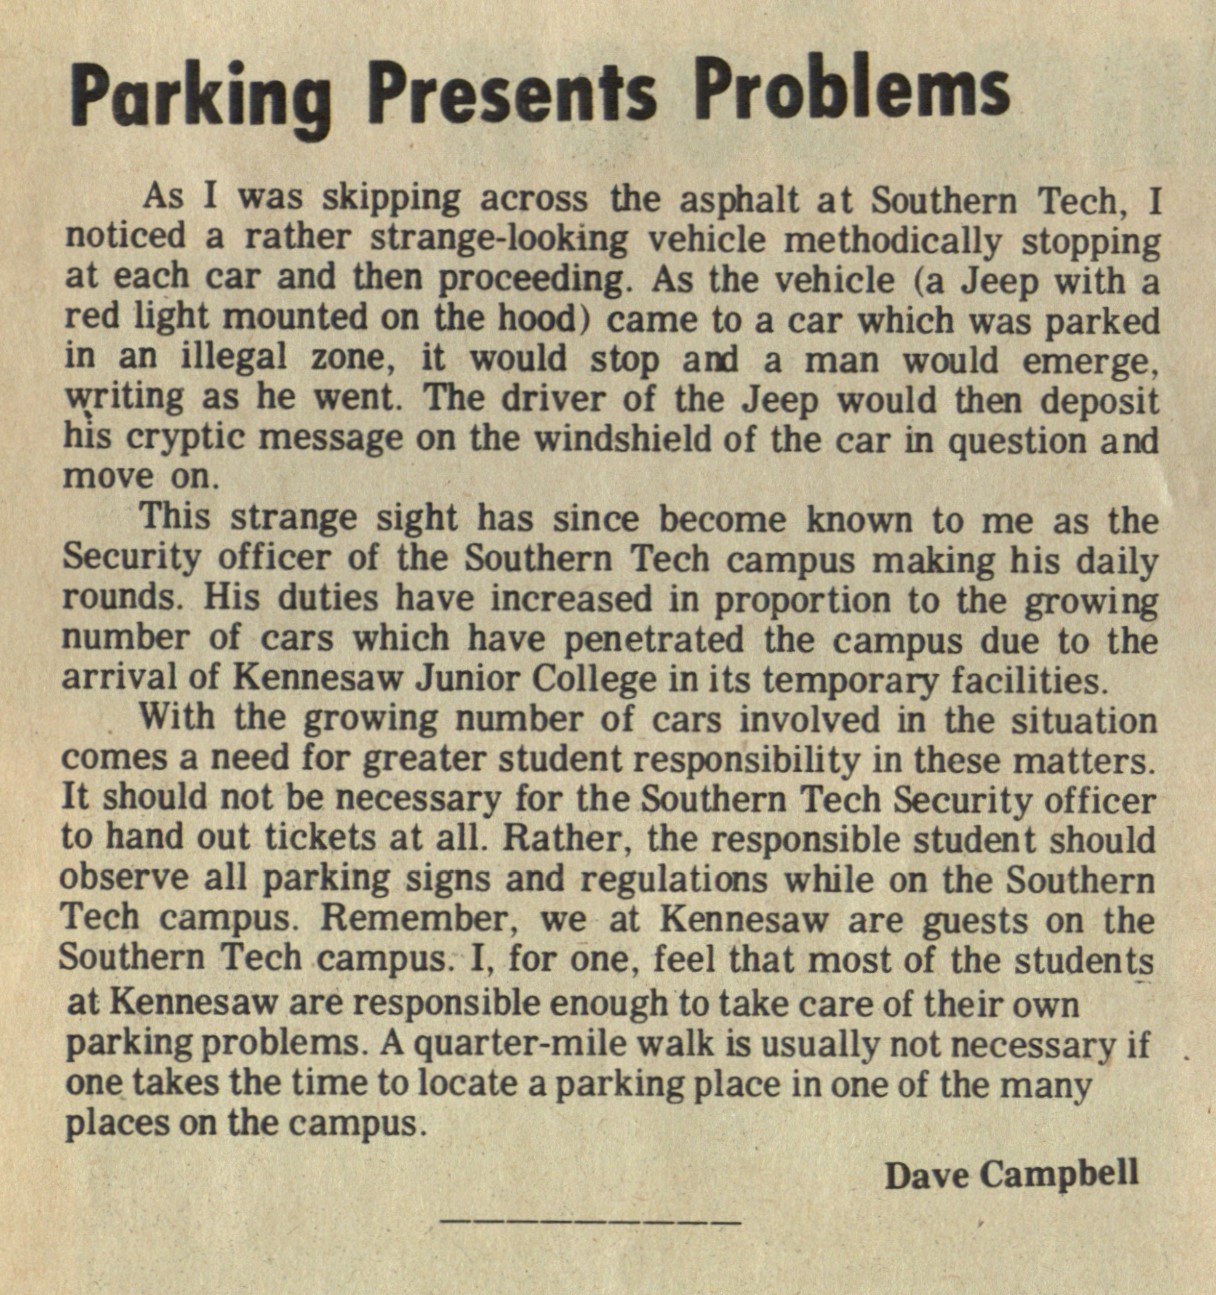 Parking Presents Problems, October 31st, 1966 (Vol.1 Issue. 2)